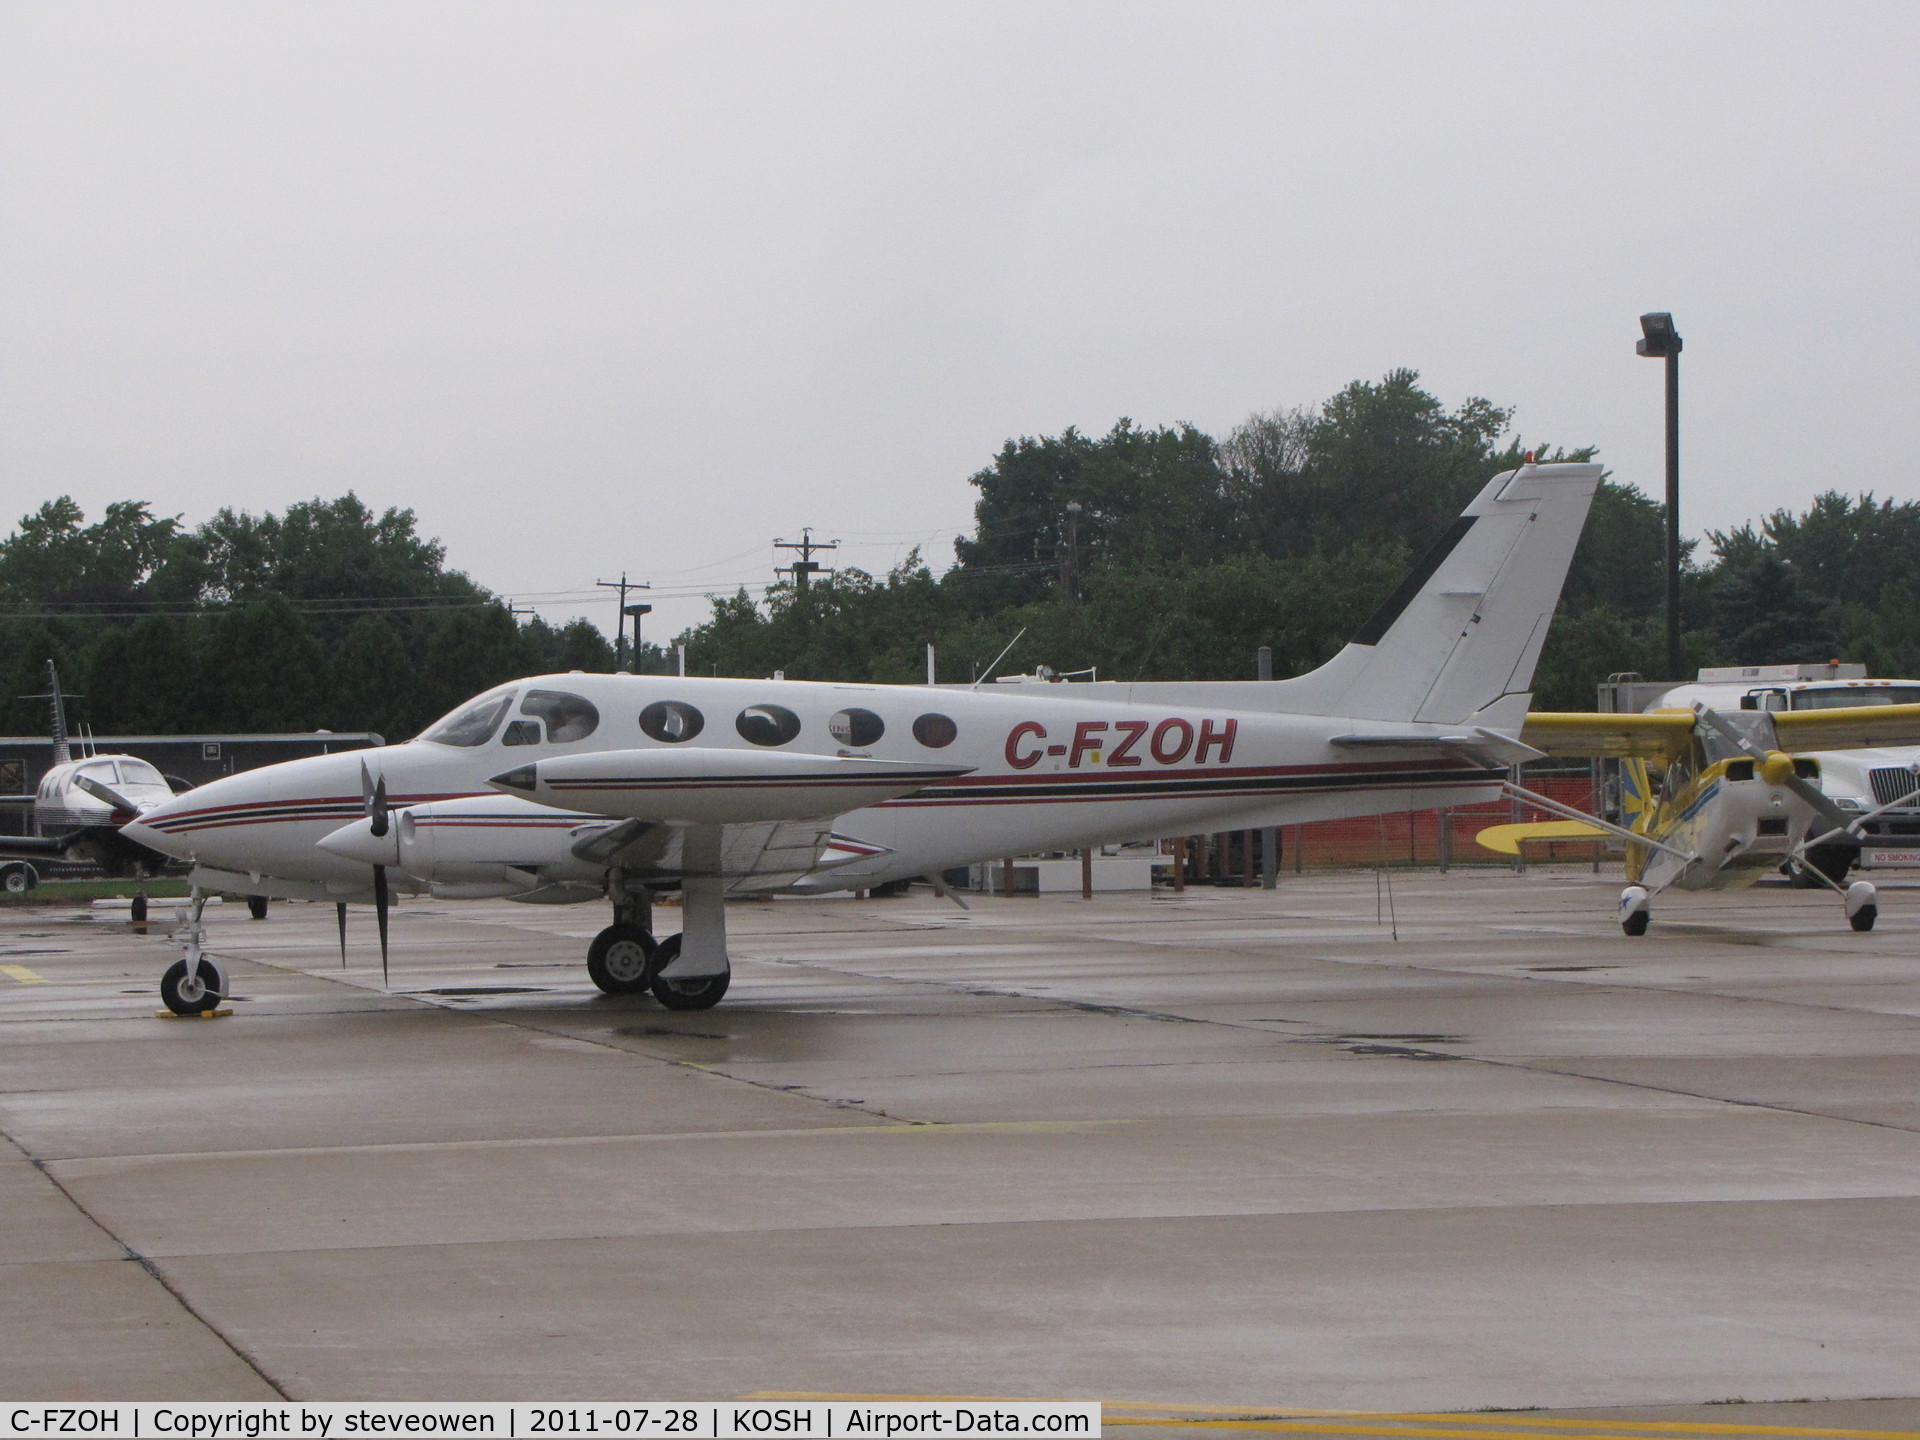 C-FZOH, 1973 Cessna 340 C/N 340-0212, on Orion FBO during EAA2011